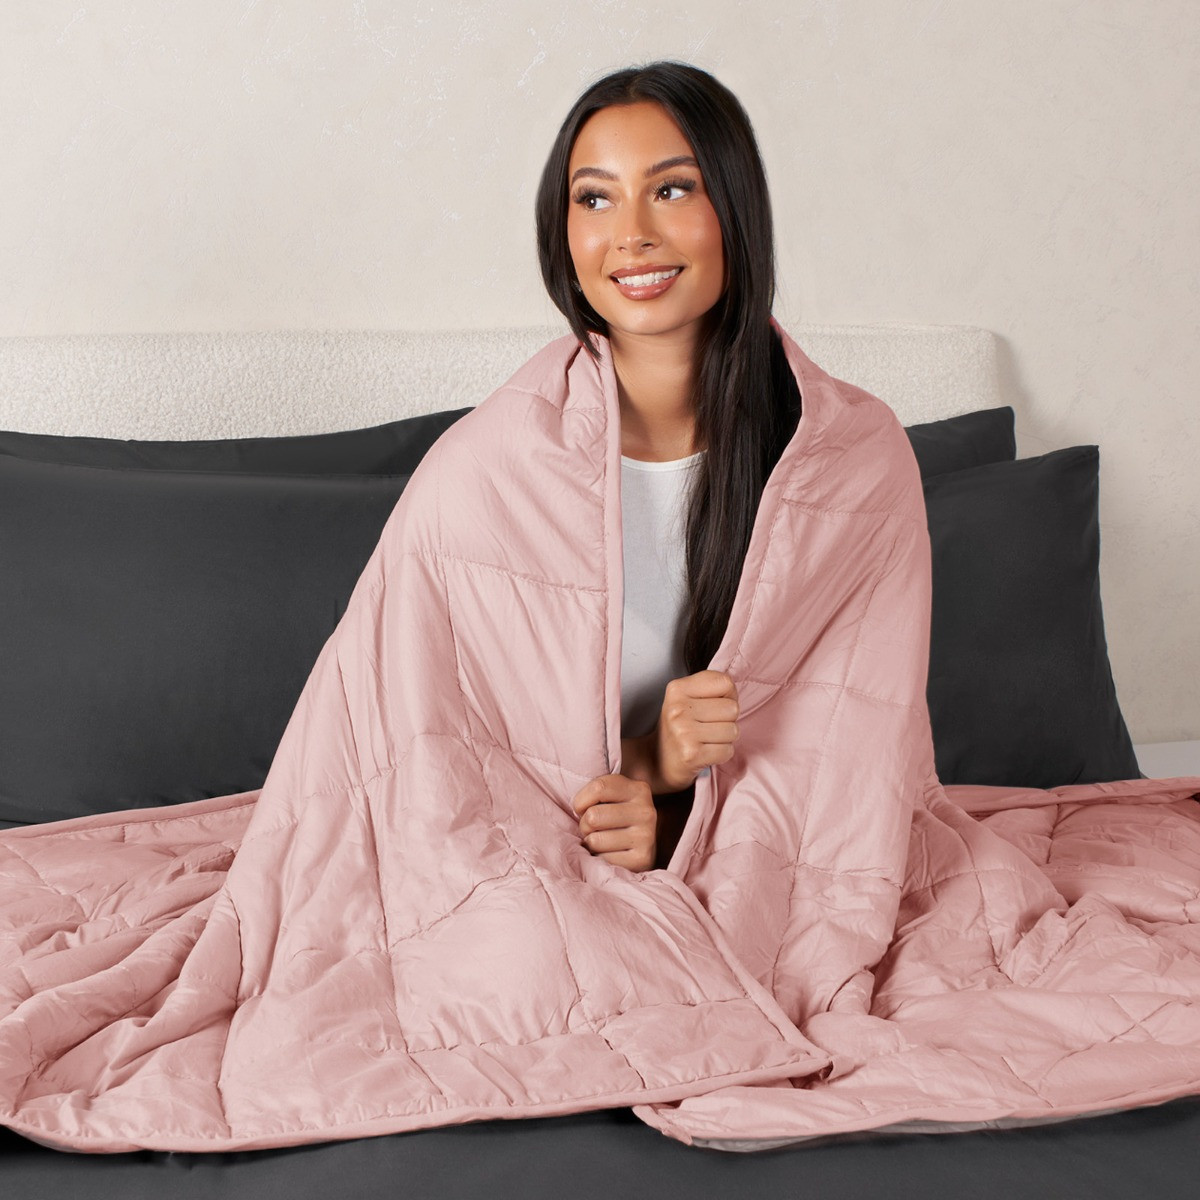 Brentfords Weighted Blanket Quilted - Blush Pink>